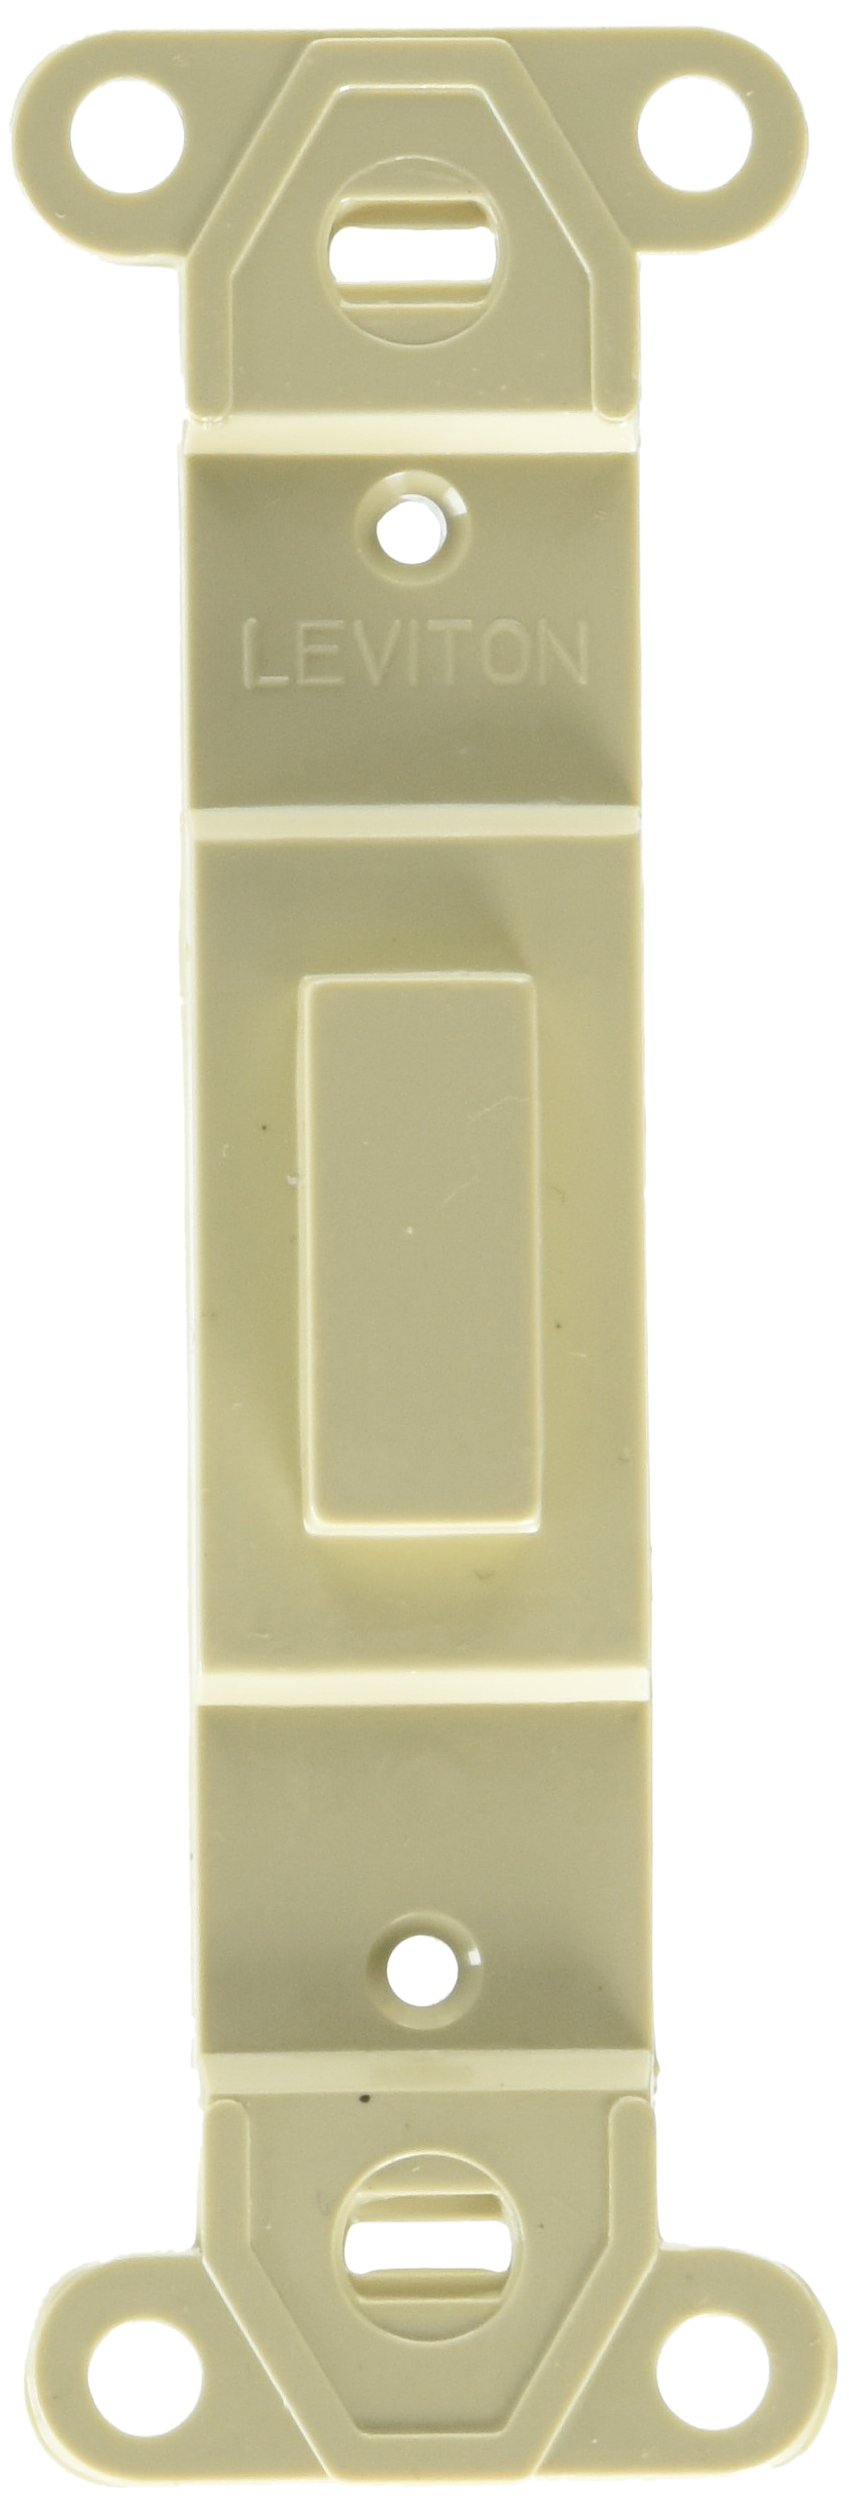 Book Cover Leviton 80700-I Toggle Plastic Adapter Plate, Blank Toggle No Hole, 5-Pack, Ivory Ivory 5 Pack